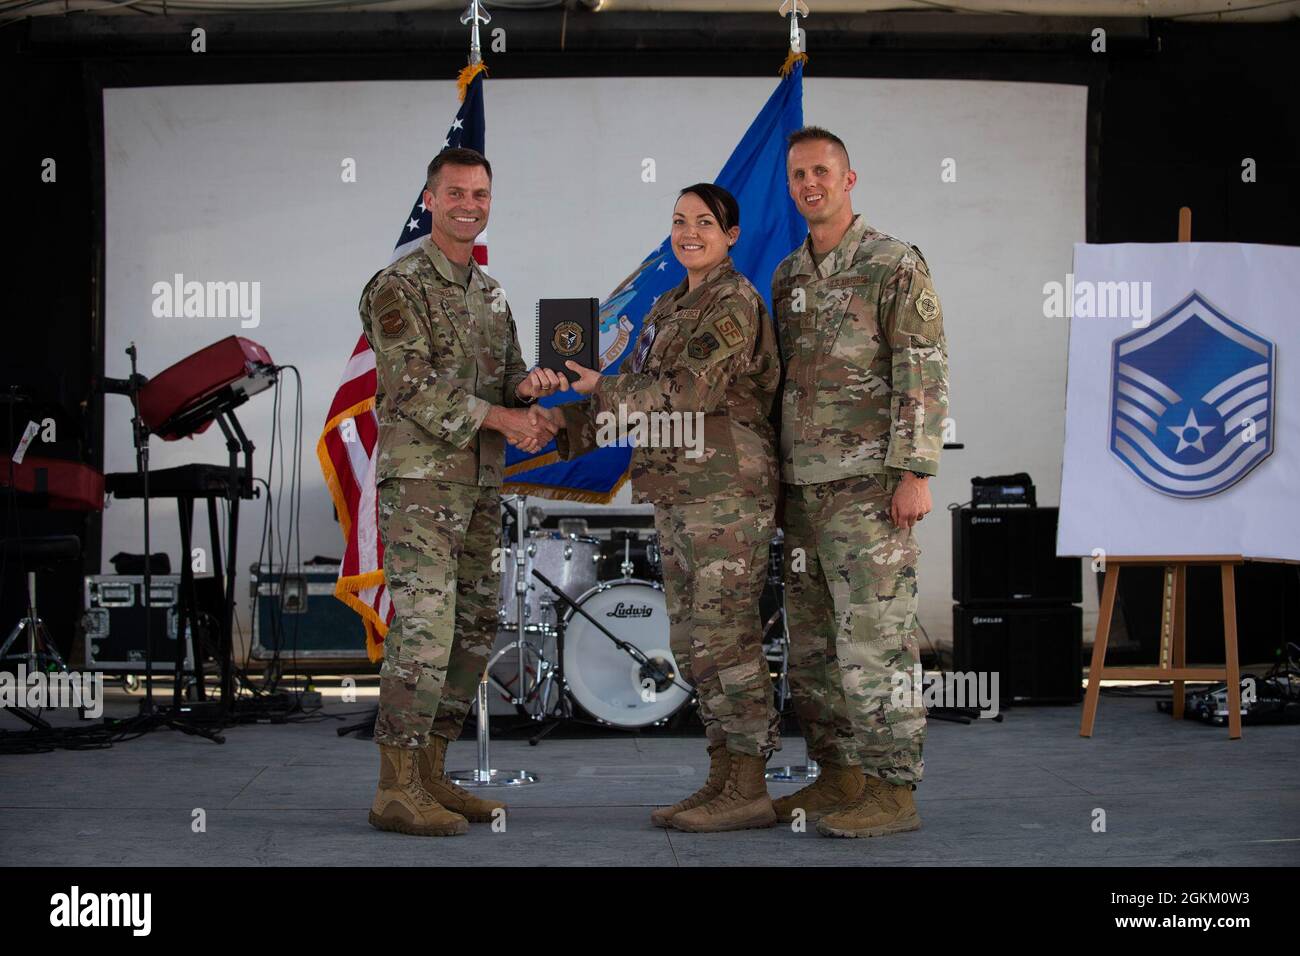 U.S. Air Force Brig. Gen. Larry R. Broadwell, 380th Air Expeditionary Wing commander (AEW), and Chief Master Sgt. Joshua J. Wiener, 380th AEW command chief, pose with Tech. Sgt. Melanie Atkins, 380th Expeditionary Security Forces Squadron,  at Al Dhafra Air Base (ADAB), United Arab Emirates, May 21, 2021. Atkins is one of 19 team ADAB technical sergeants that were selected for promoted to master sergeant this year. Stock Photo